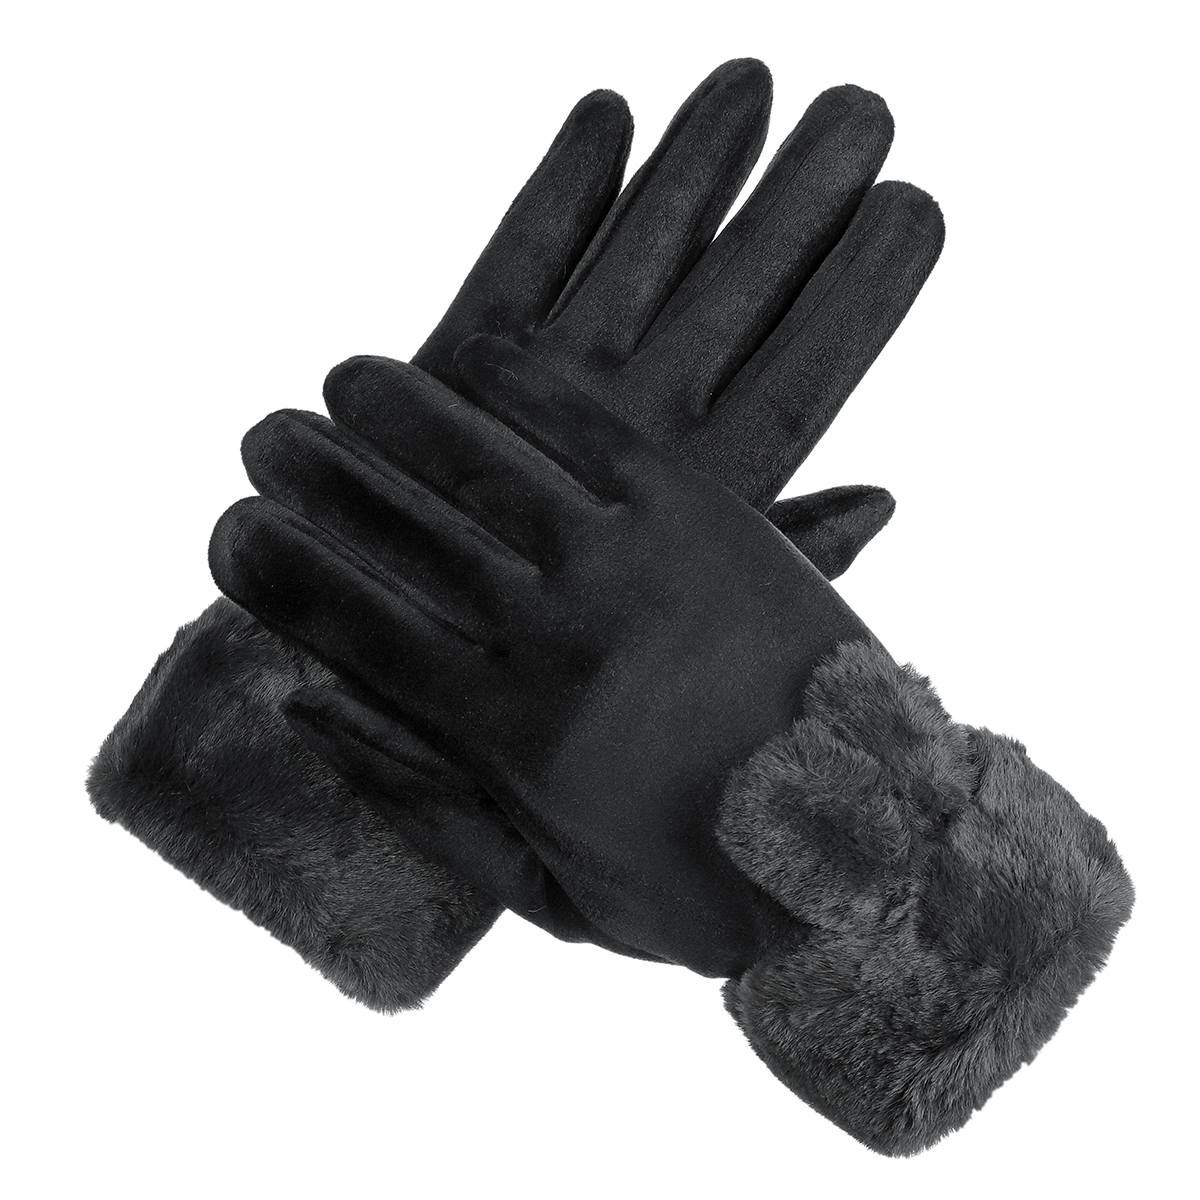 Women Winter Warm Gloves Outdoor Sport Touch Screen Windproof Full-finger Thermal Gloves